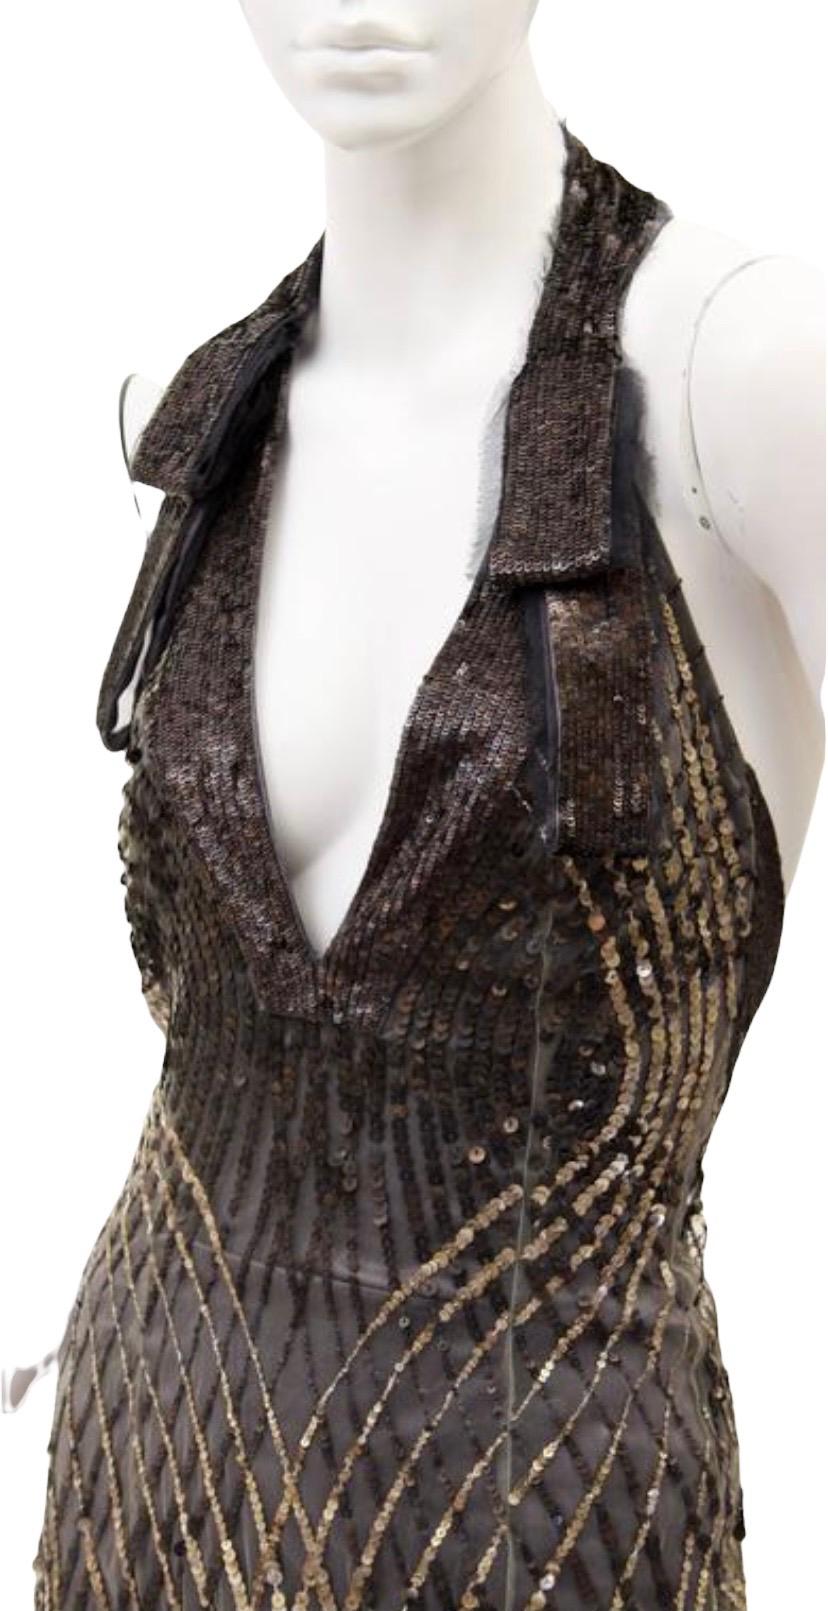 F/W 2005 Vintage GUCCI Sequin Embellished Dress by Alessandra Facchinetti In Excellent Condition For Sale In Montgomery, TX